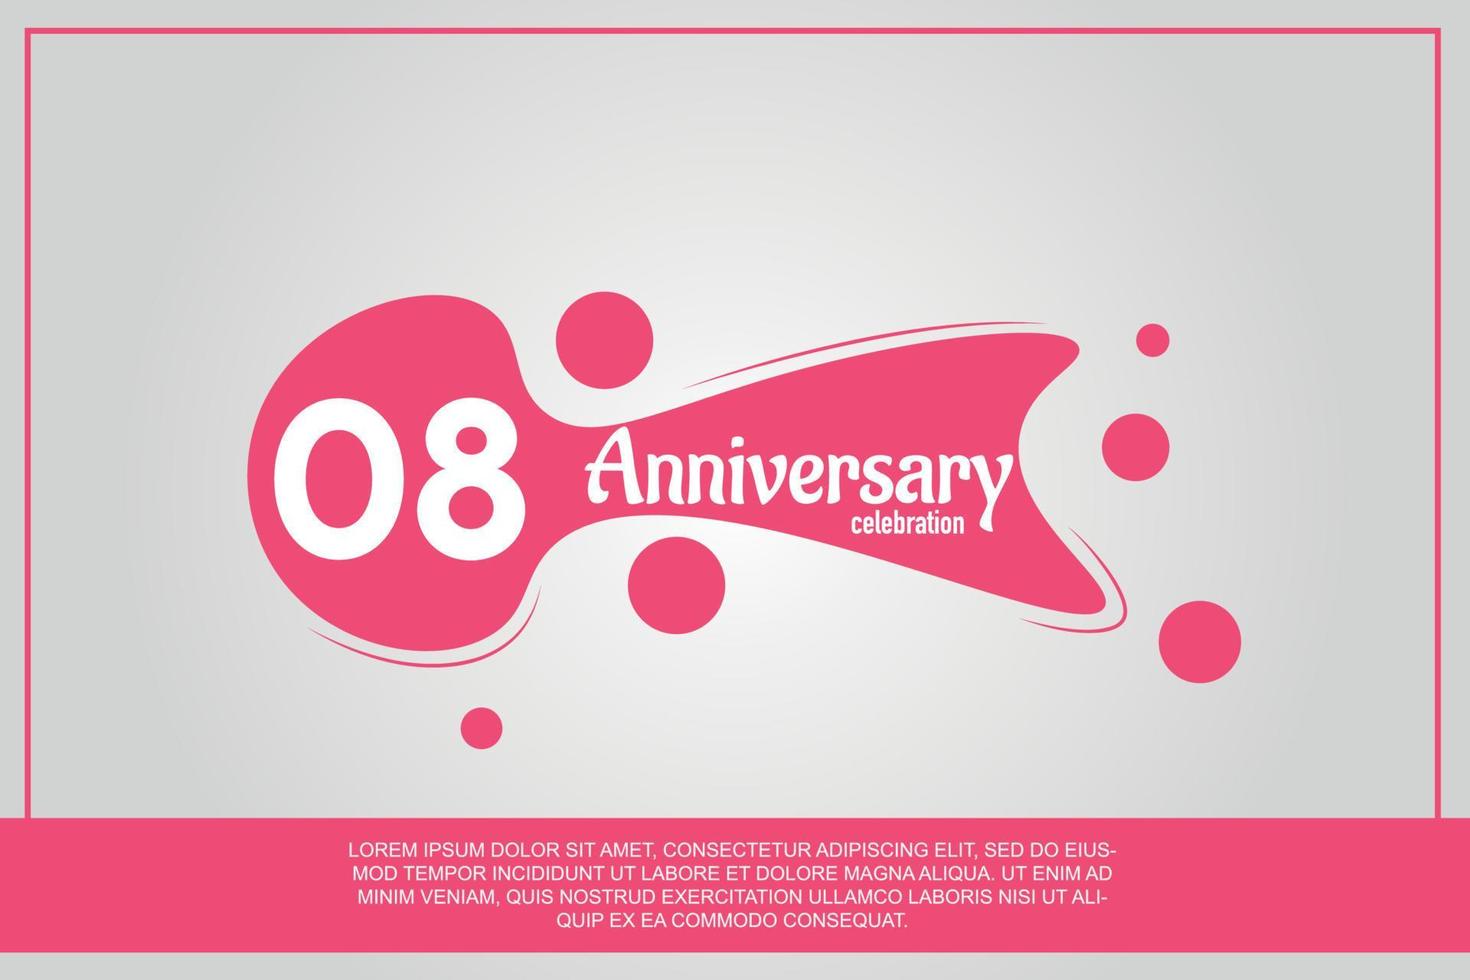 08 year anniversary celebration logo with pink color design with pink color bubbles on gray background vector abstract illustration